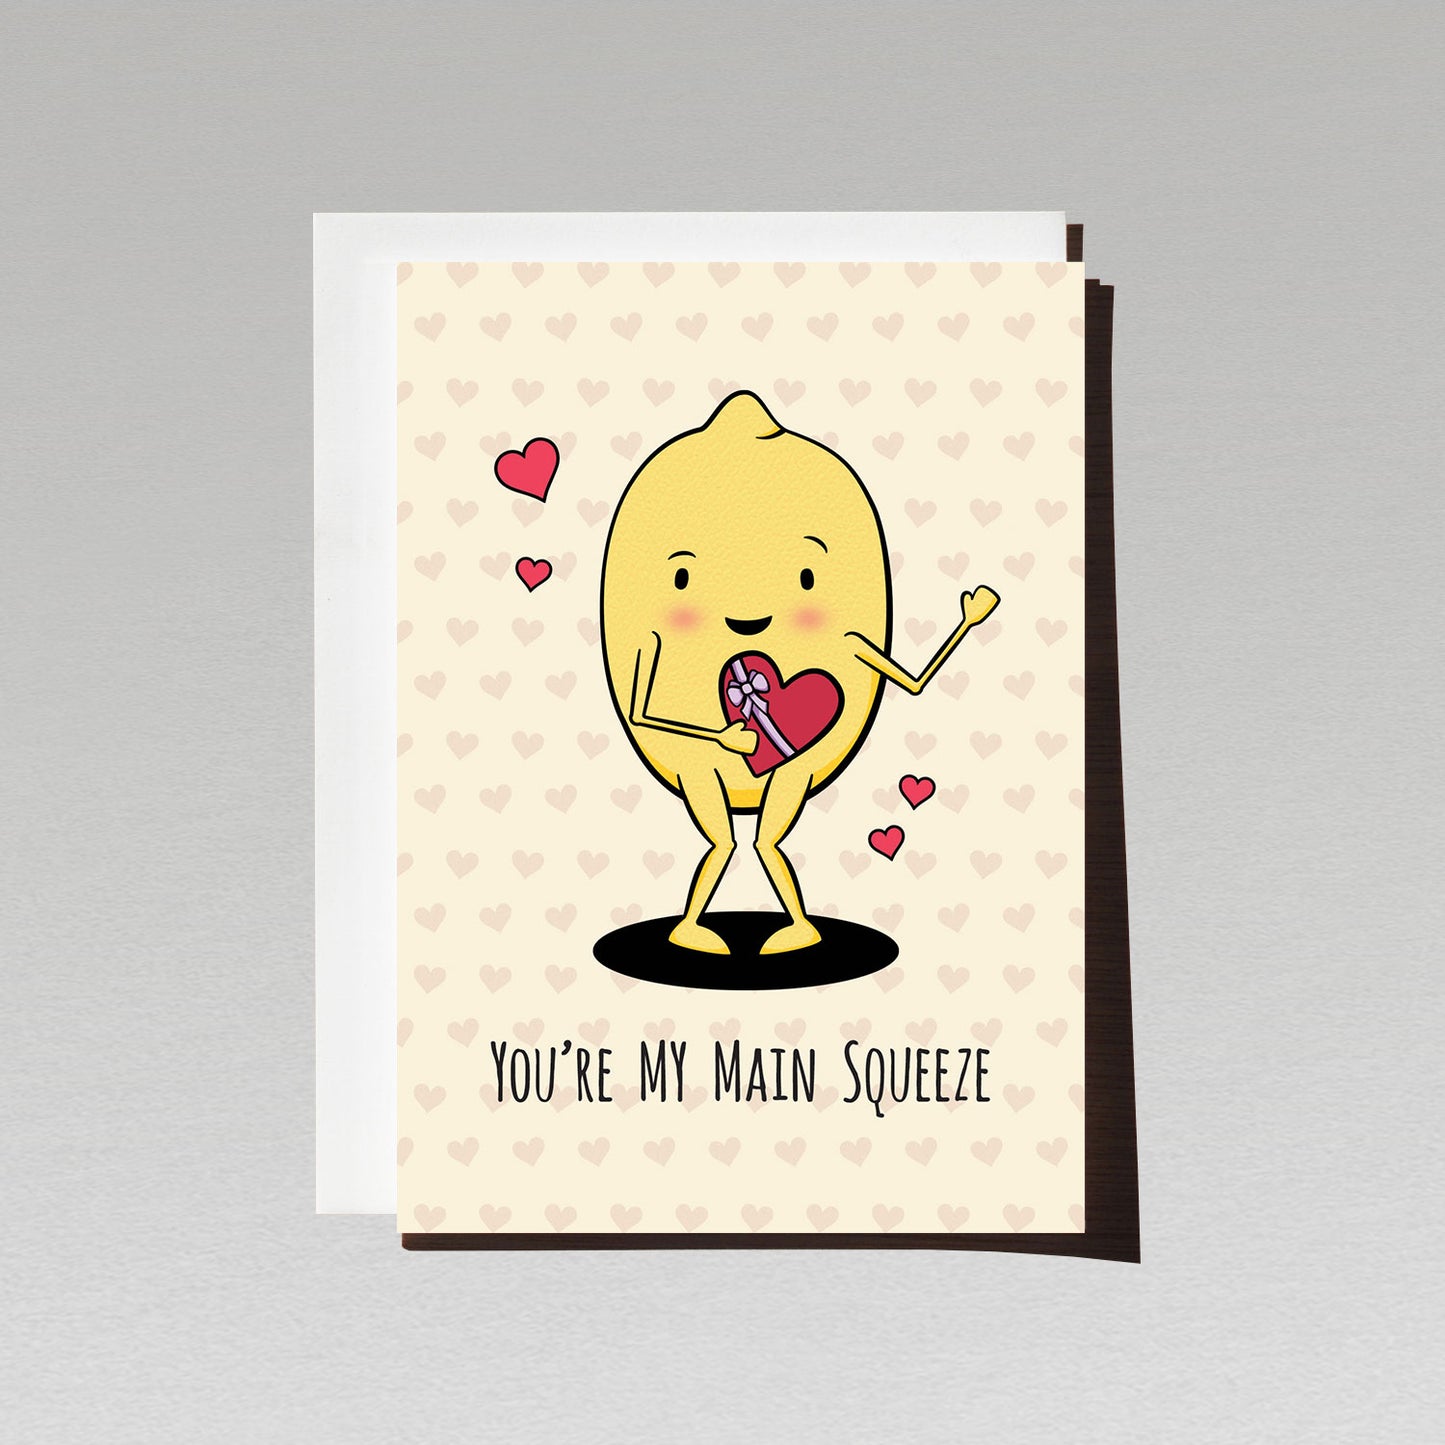 Greeting card with cute lemon character holding heart shaped box of chocolates with text youre my main squeeze